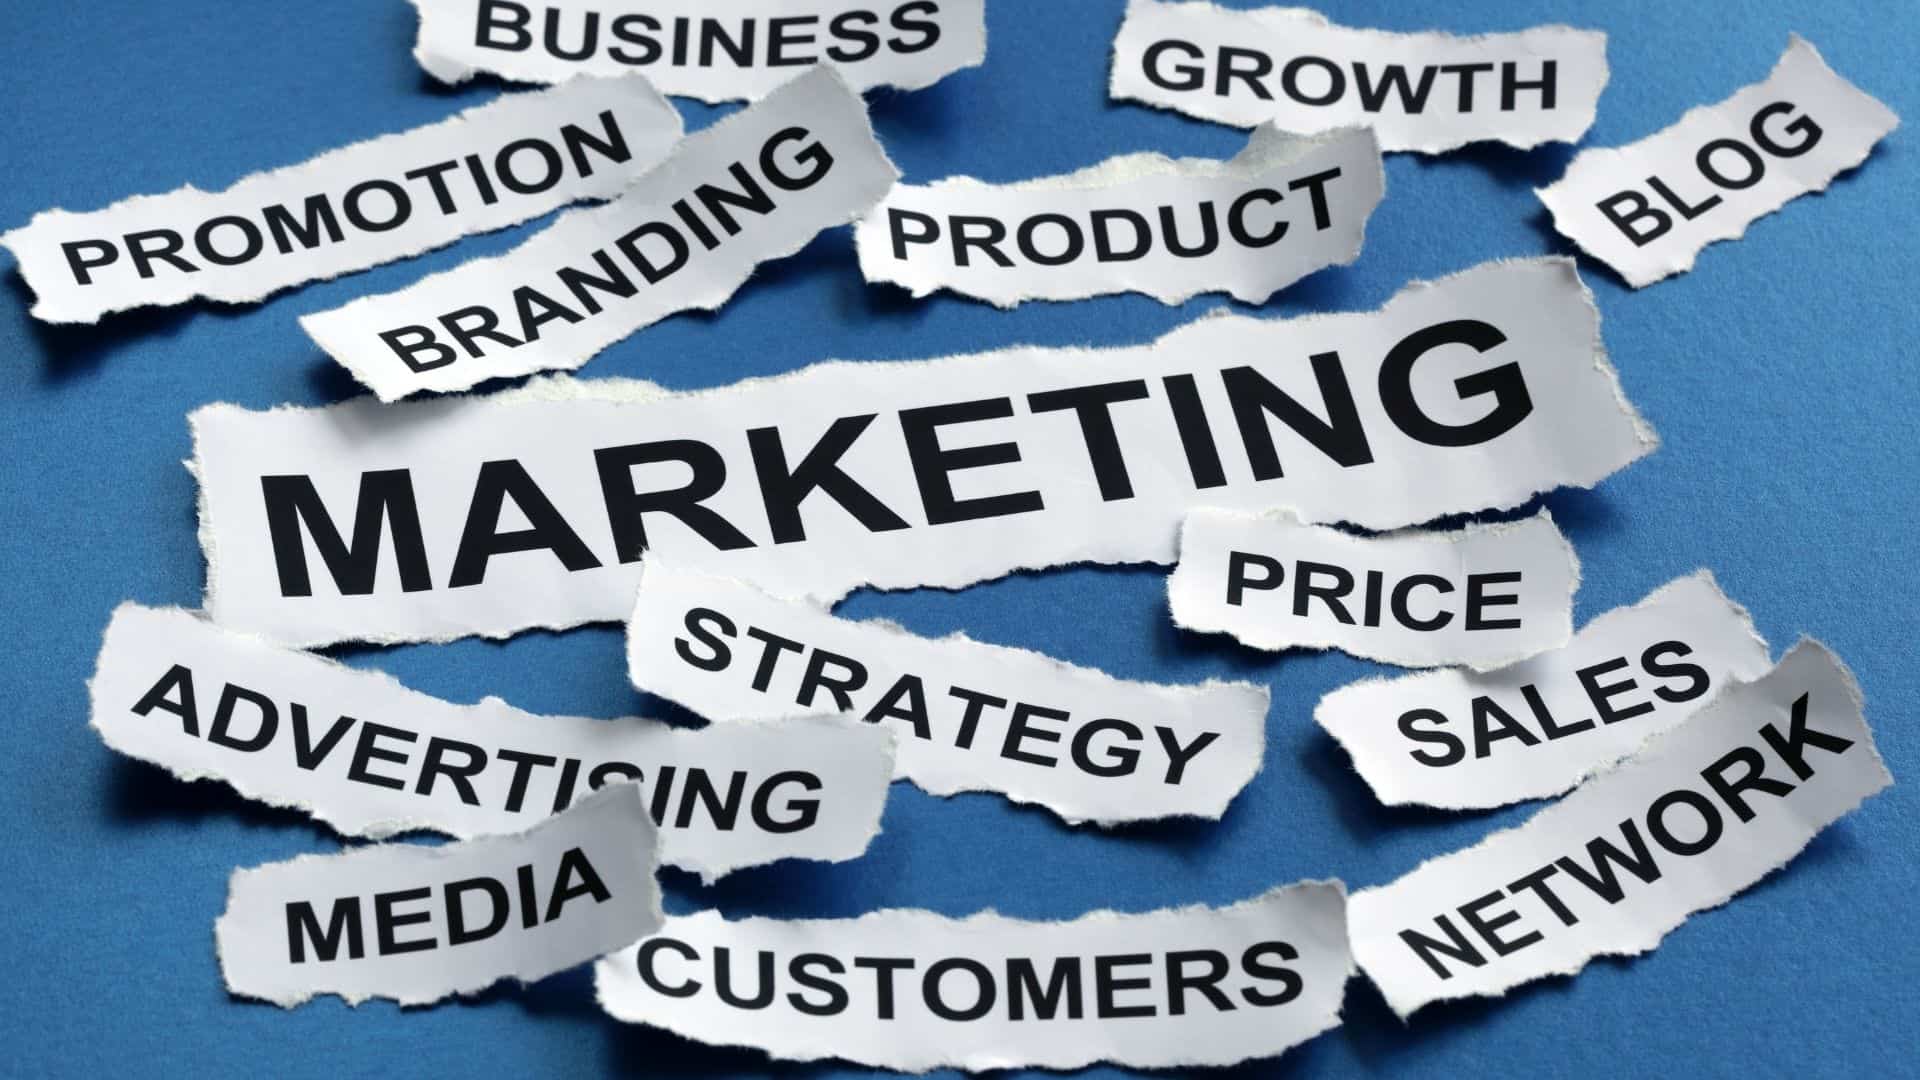 Fundamentals of Marketing - Core Concepts To Understand